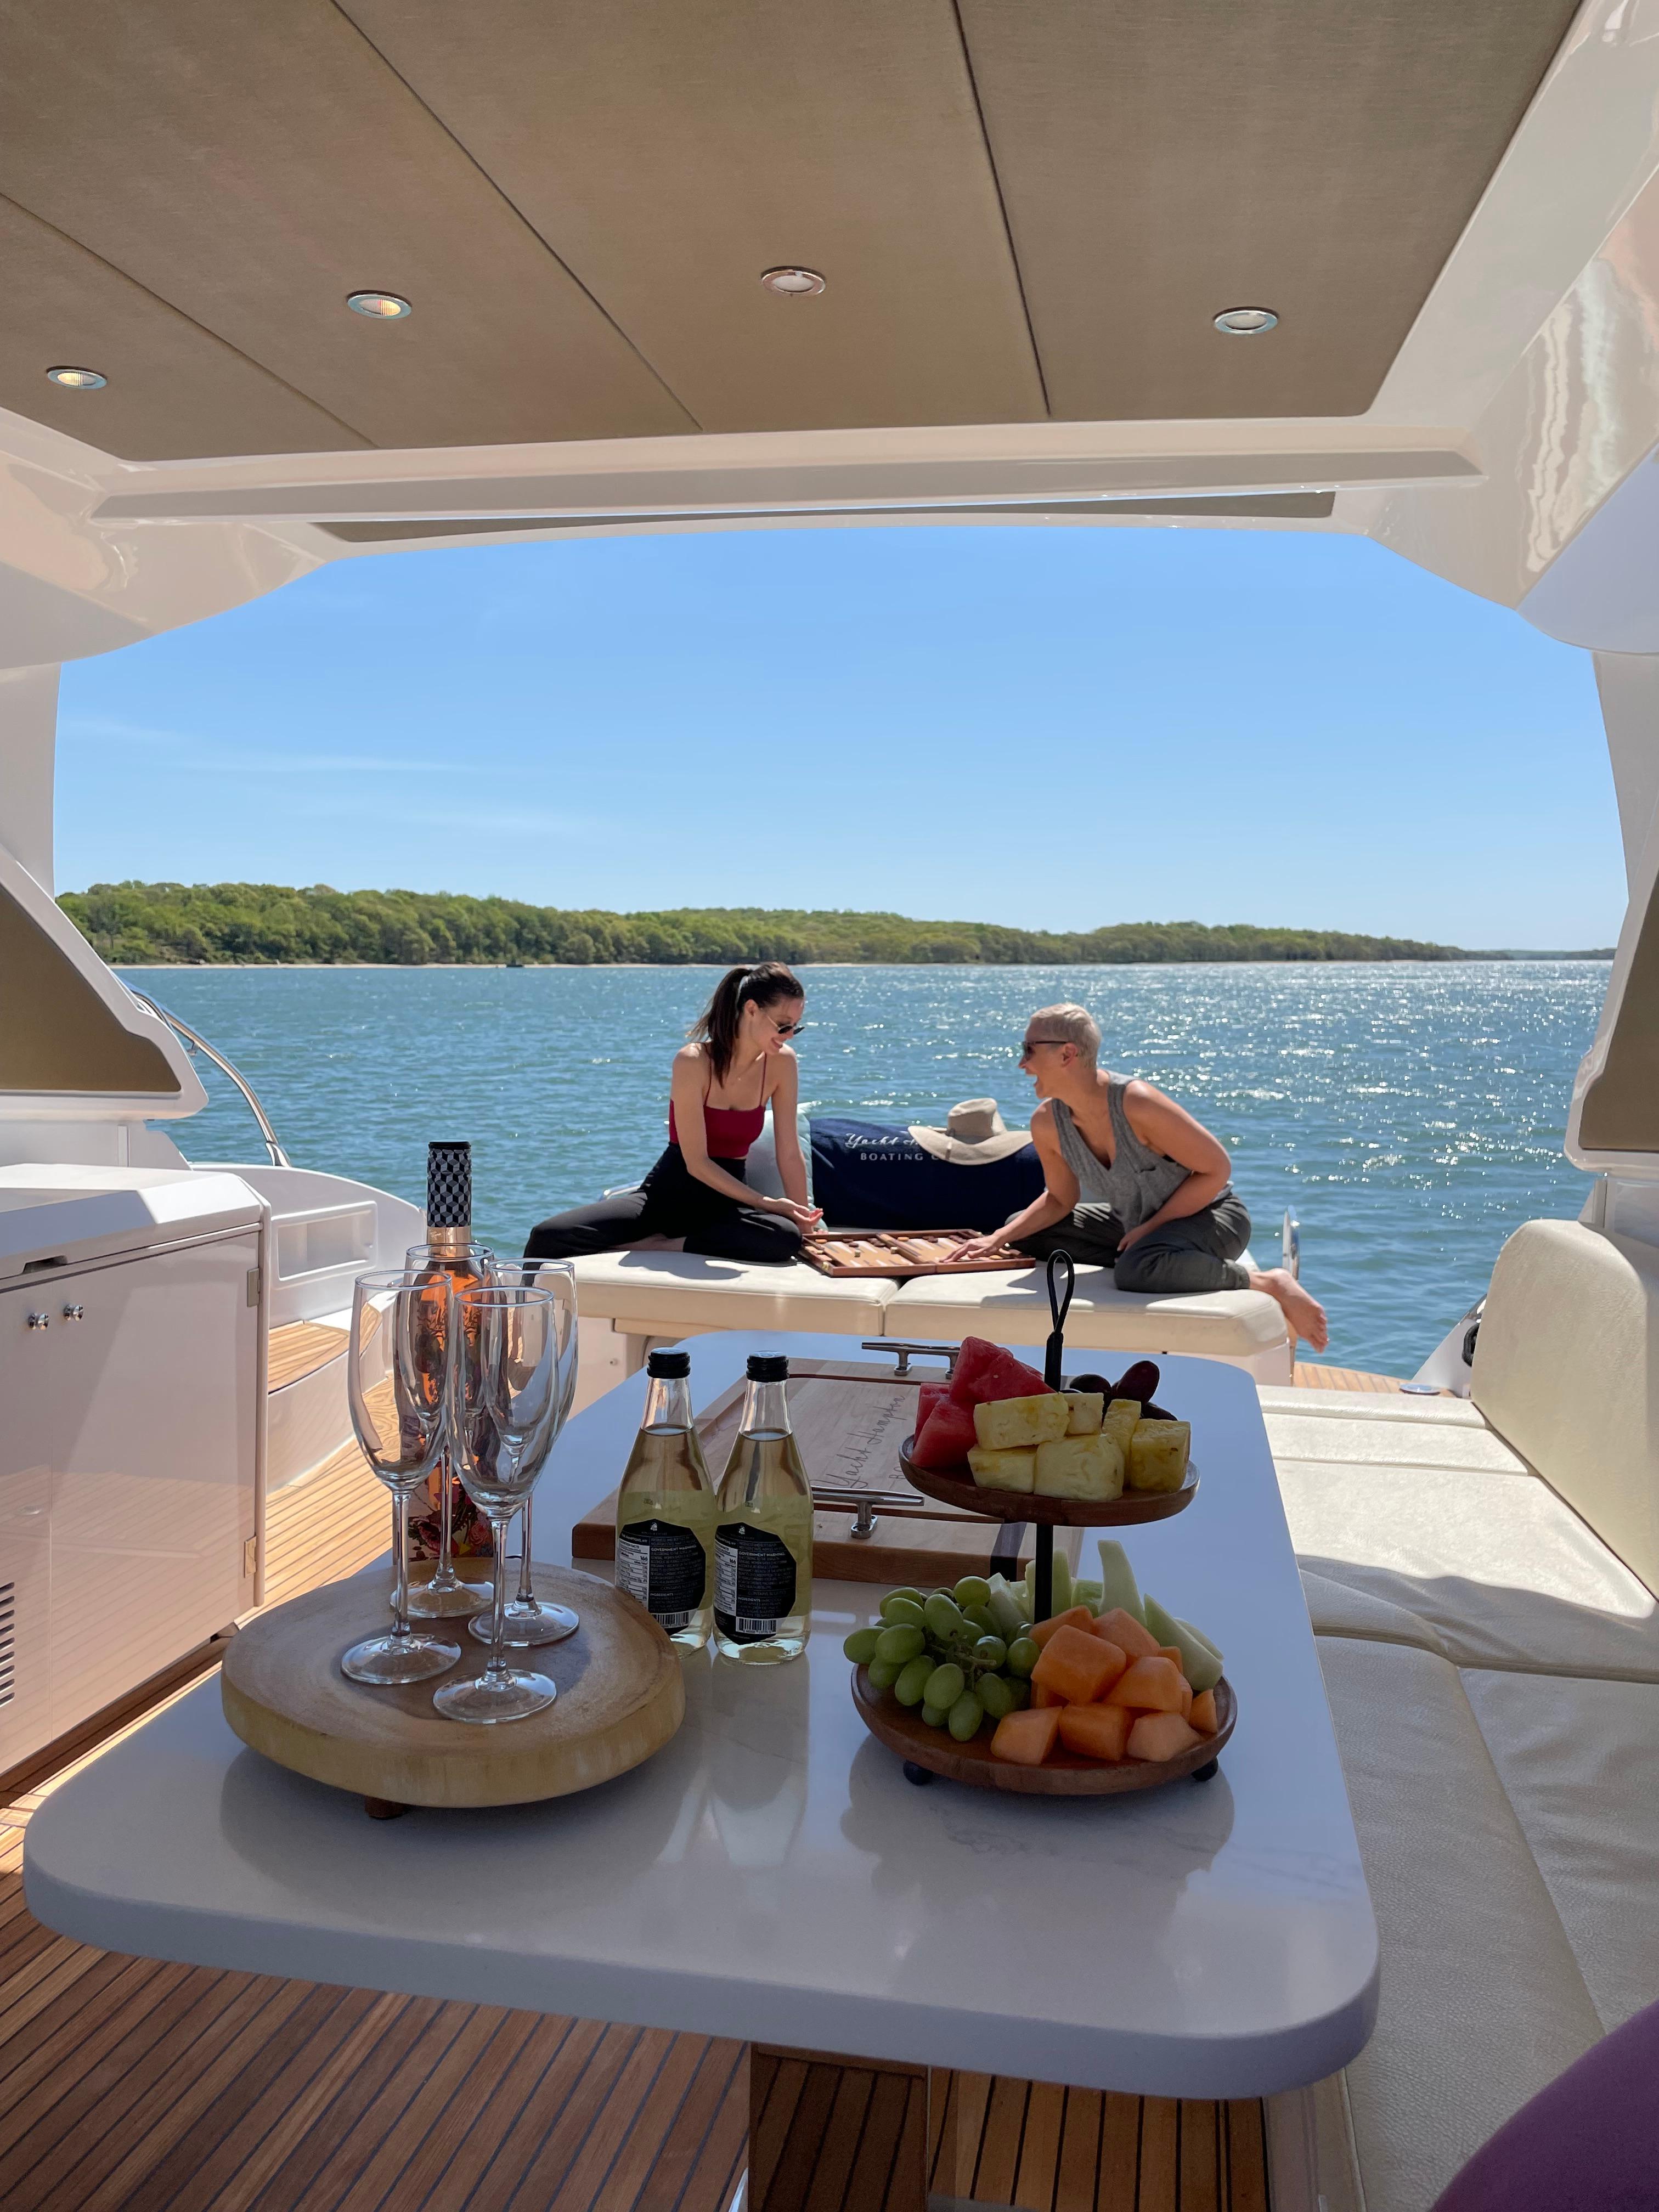 Savor Exquisite Cuisine During a Palm Beach Yacht Charter: Dining Options While at Sea